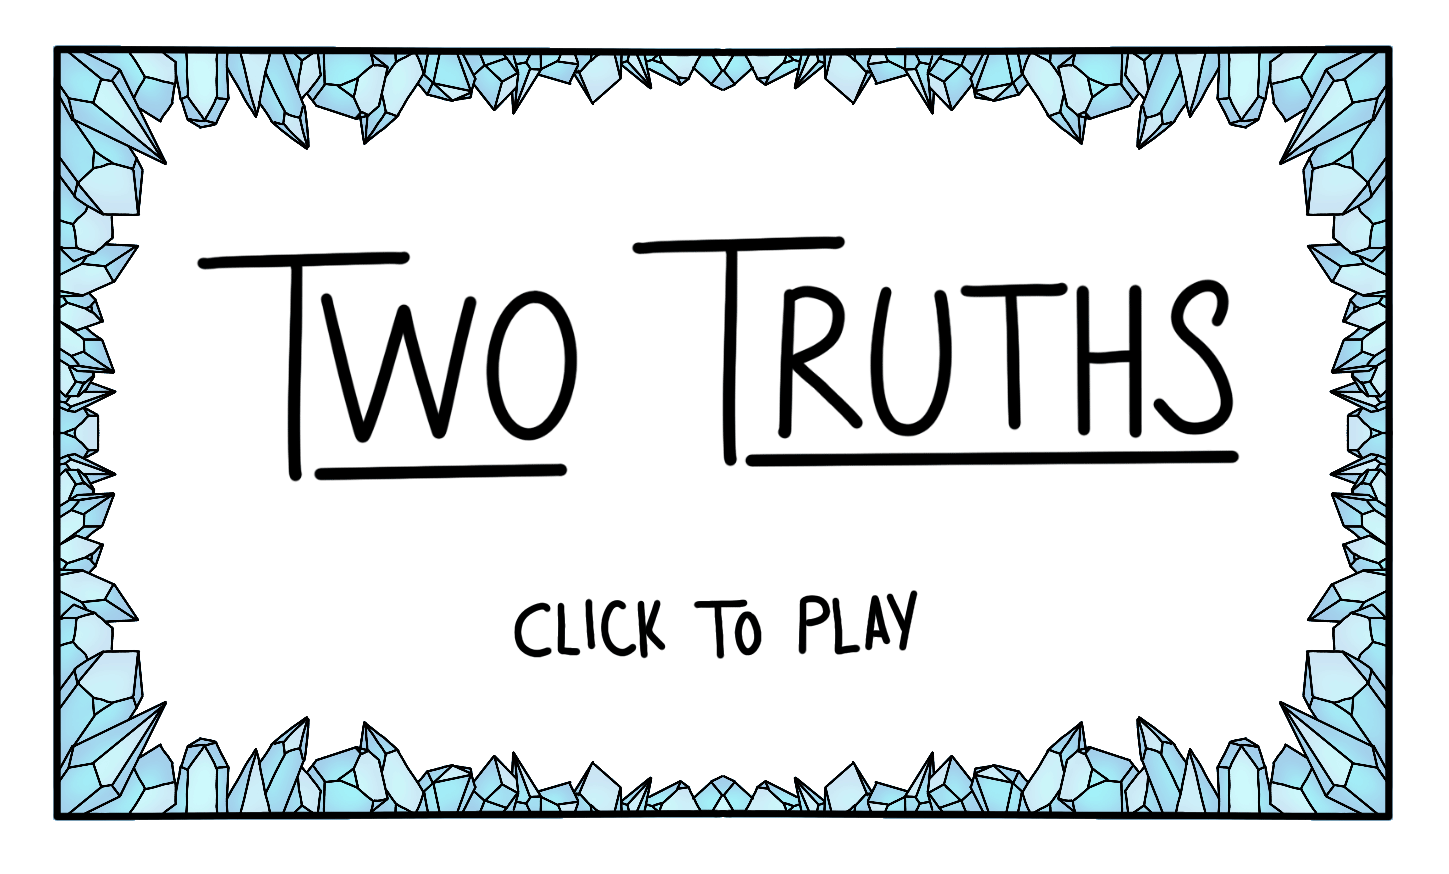 Launch Two Truths